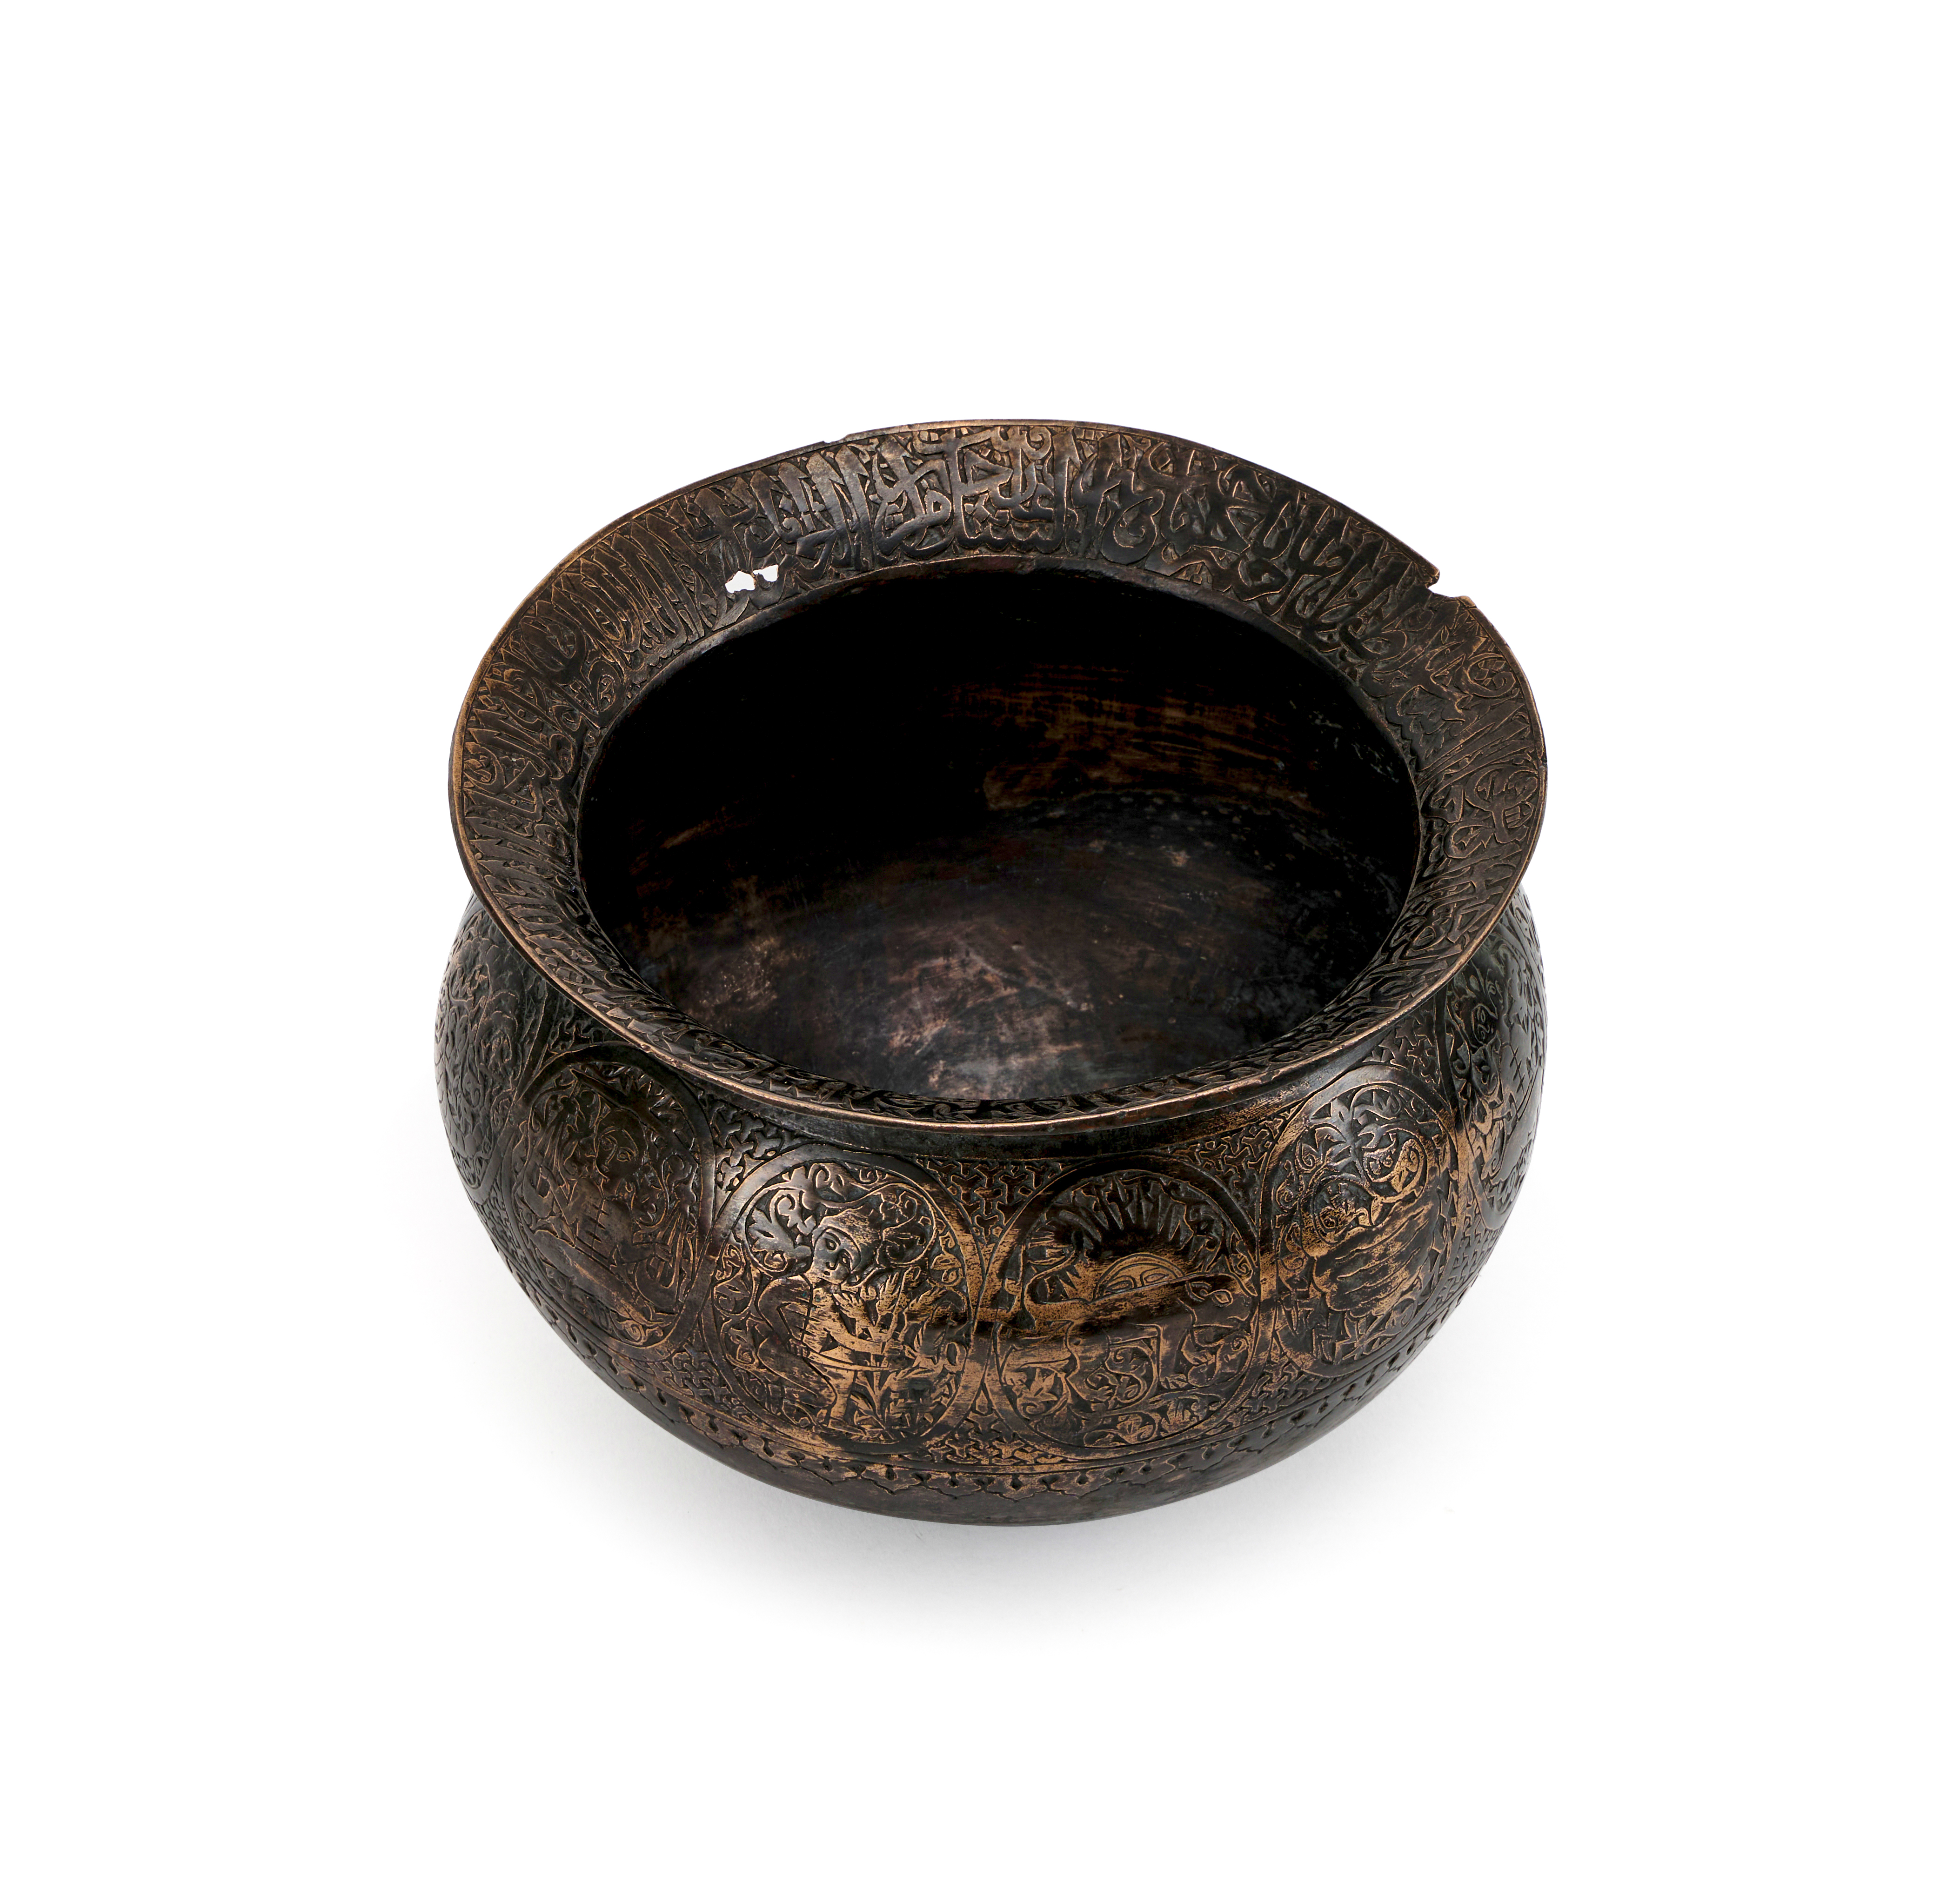 A TINNED COPPER CALLIGRAPHIC AND ZODIAC BASIN, ZAND DYNASTY, 18TH CENTURY - Image 4 of 7